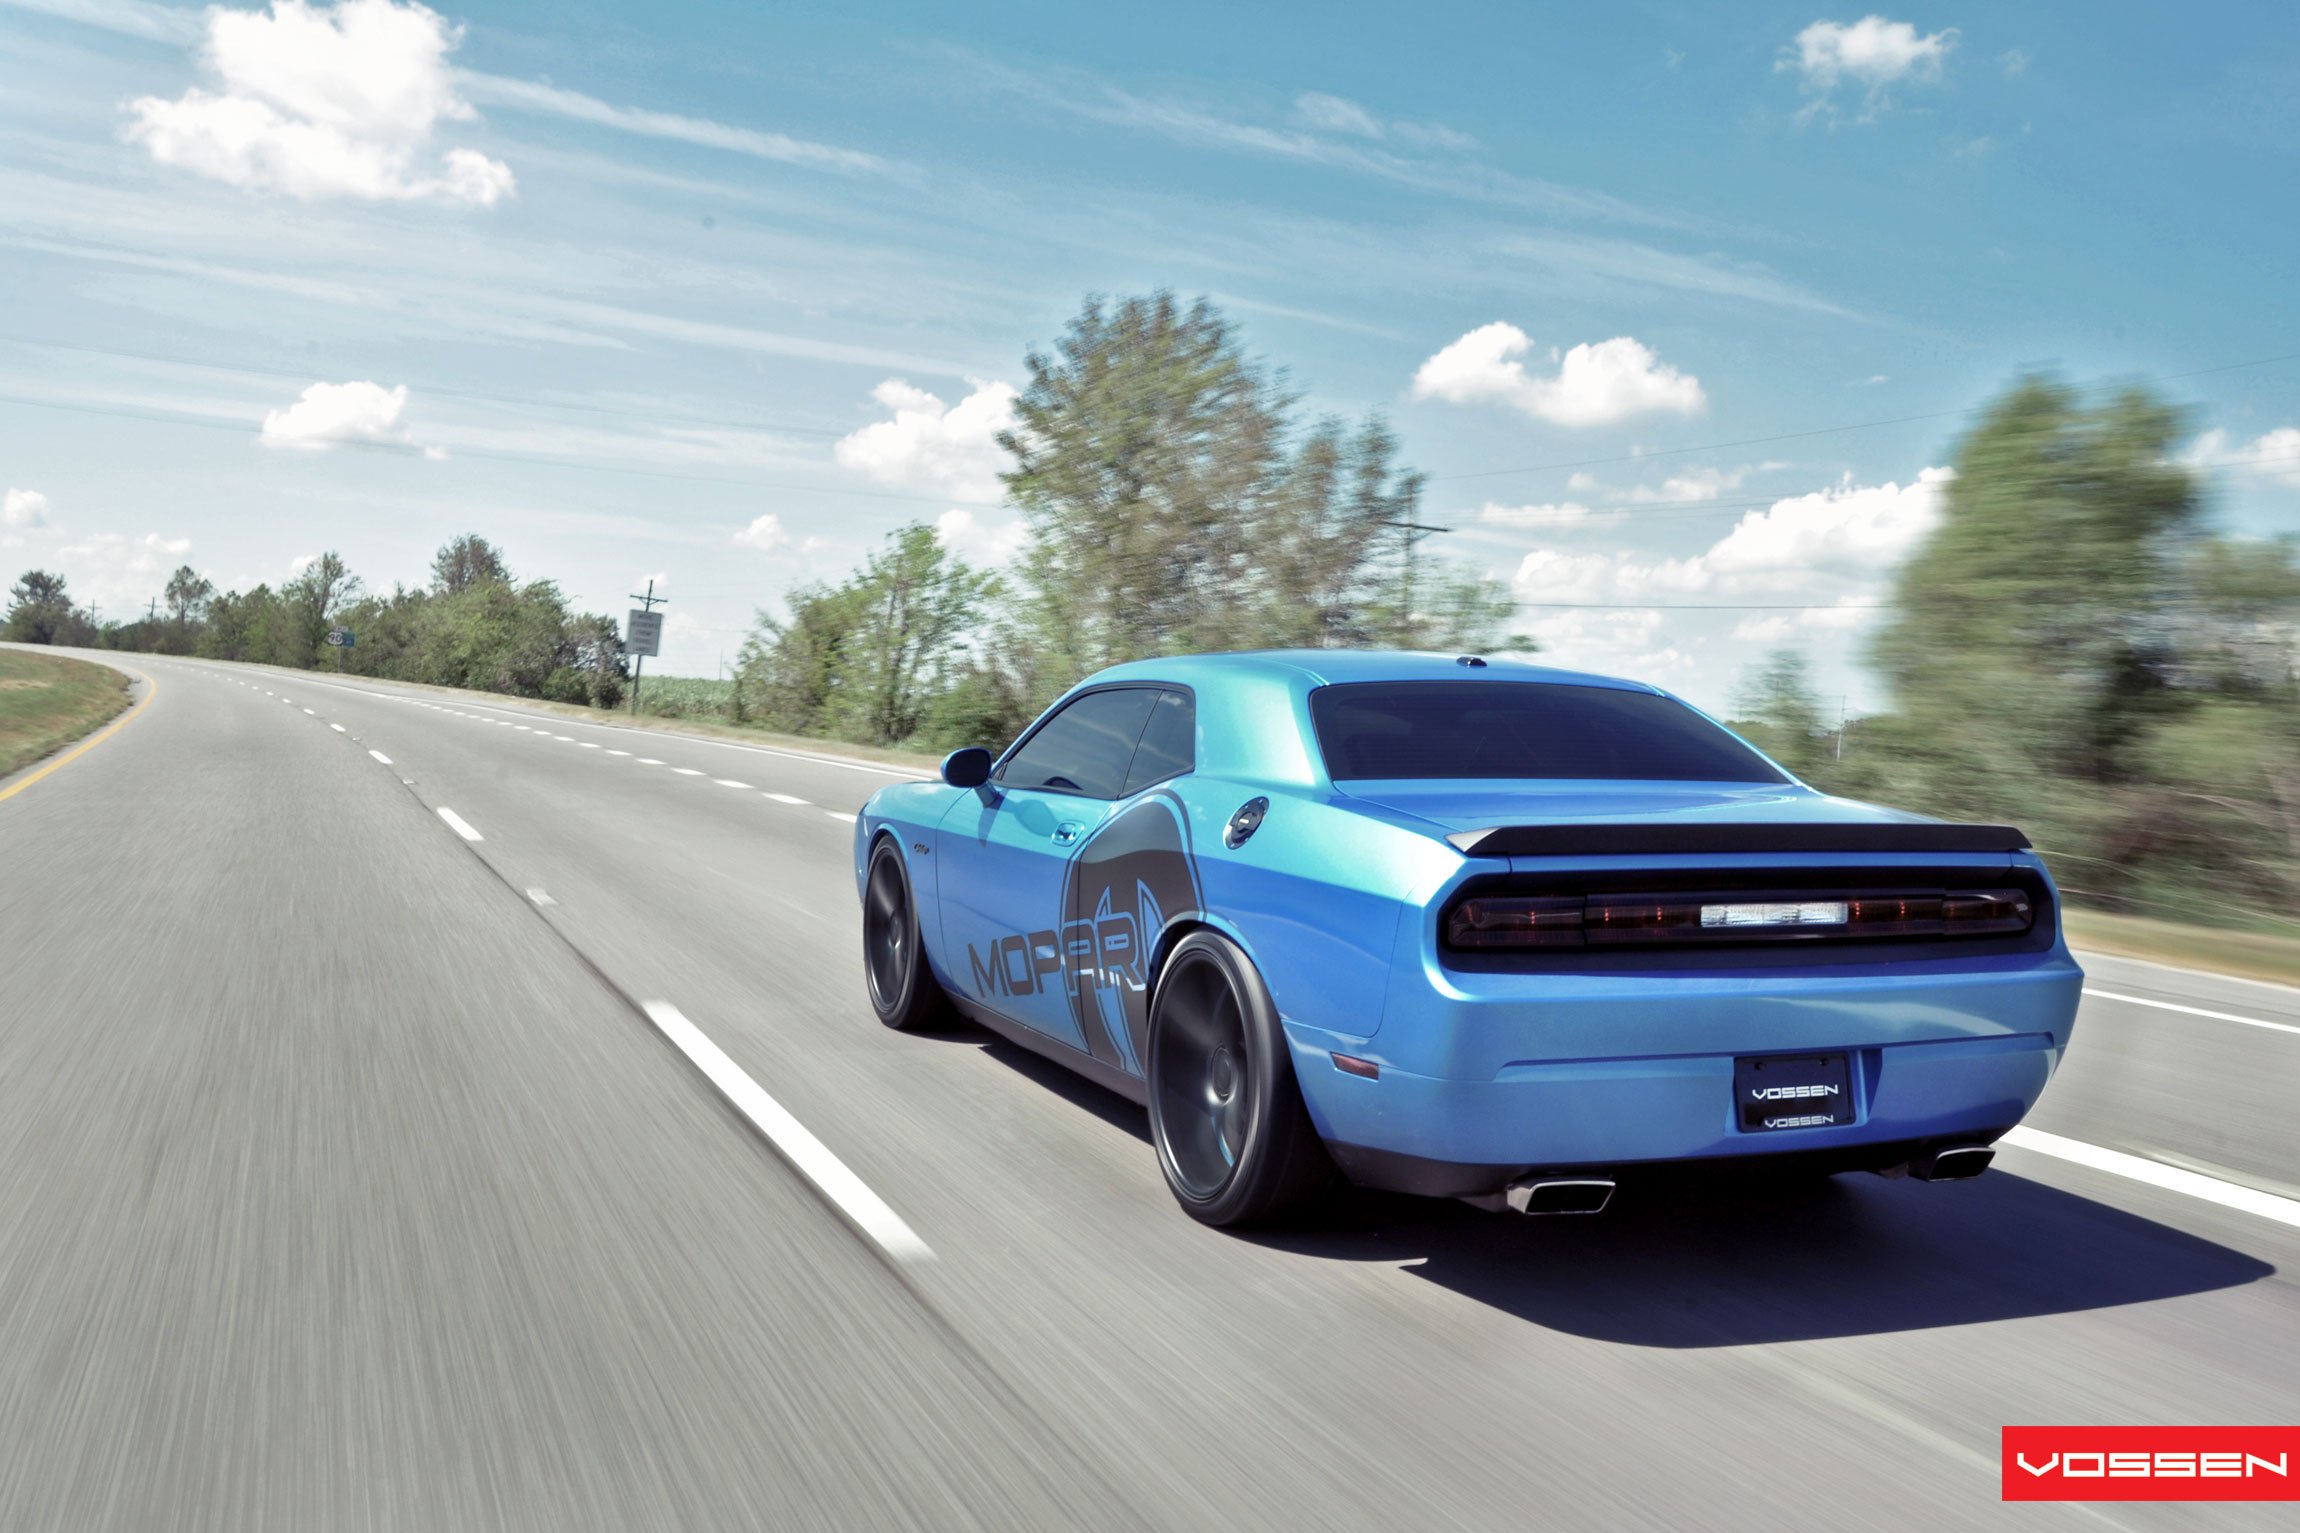 Custom Rear Bumper Cover on Blue Dodge Challenger - Photo by Vossen